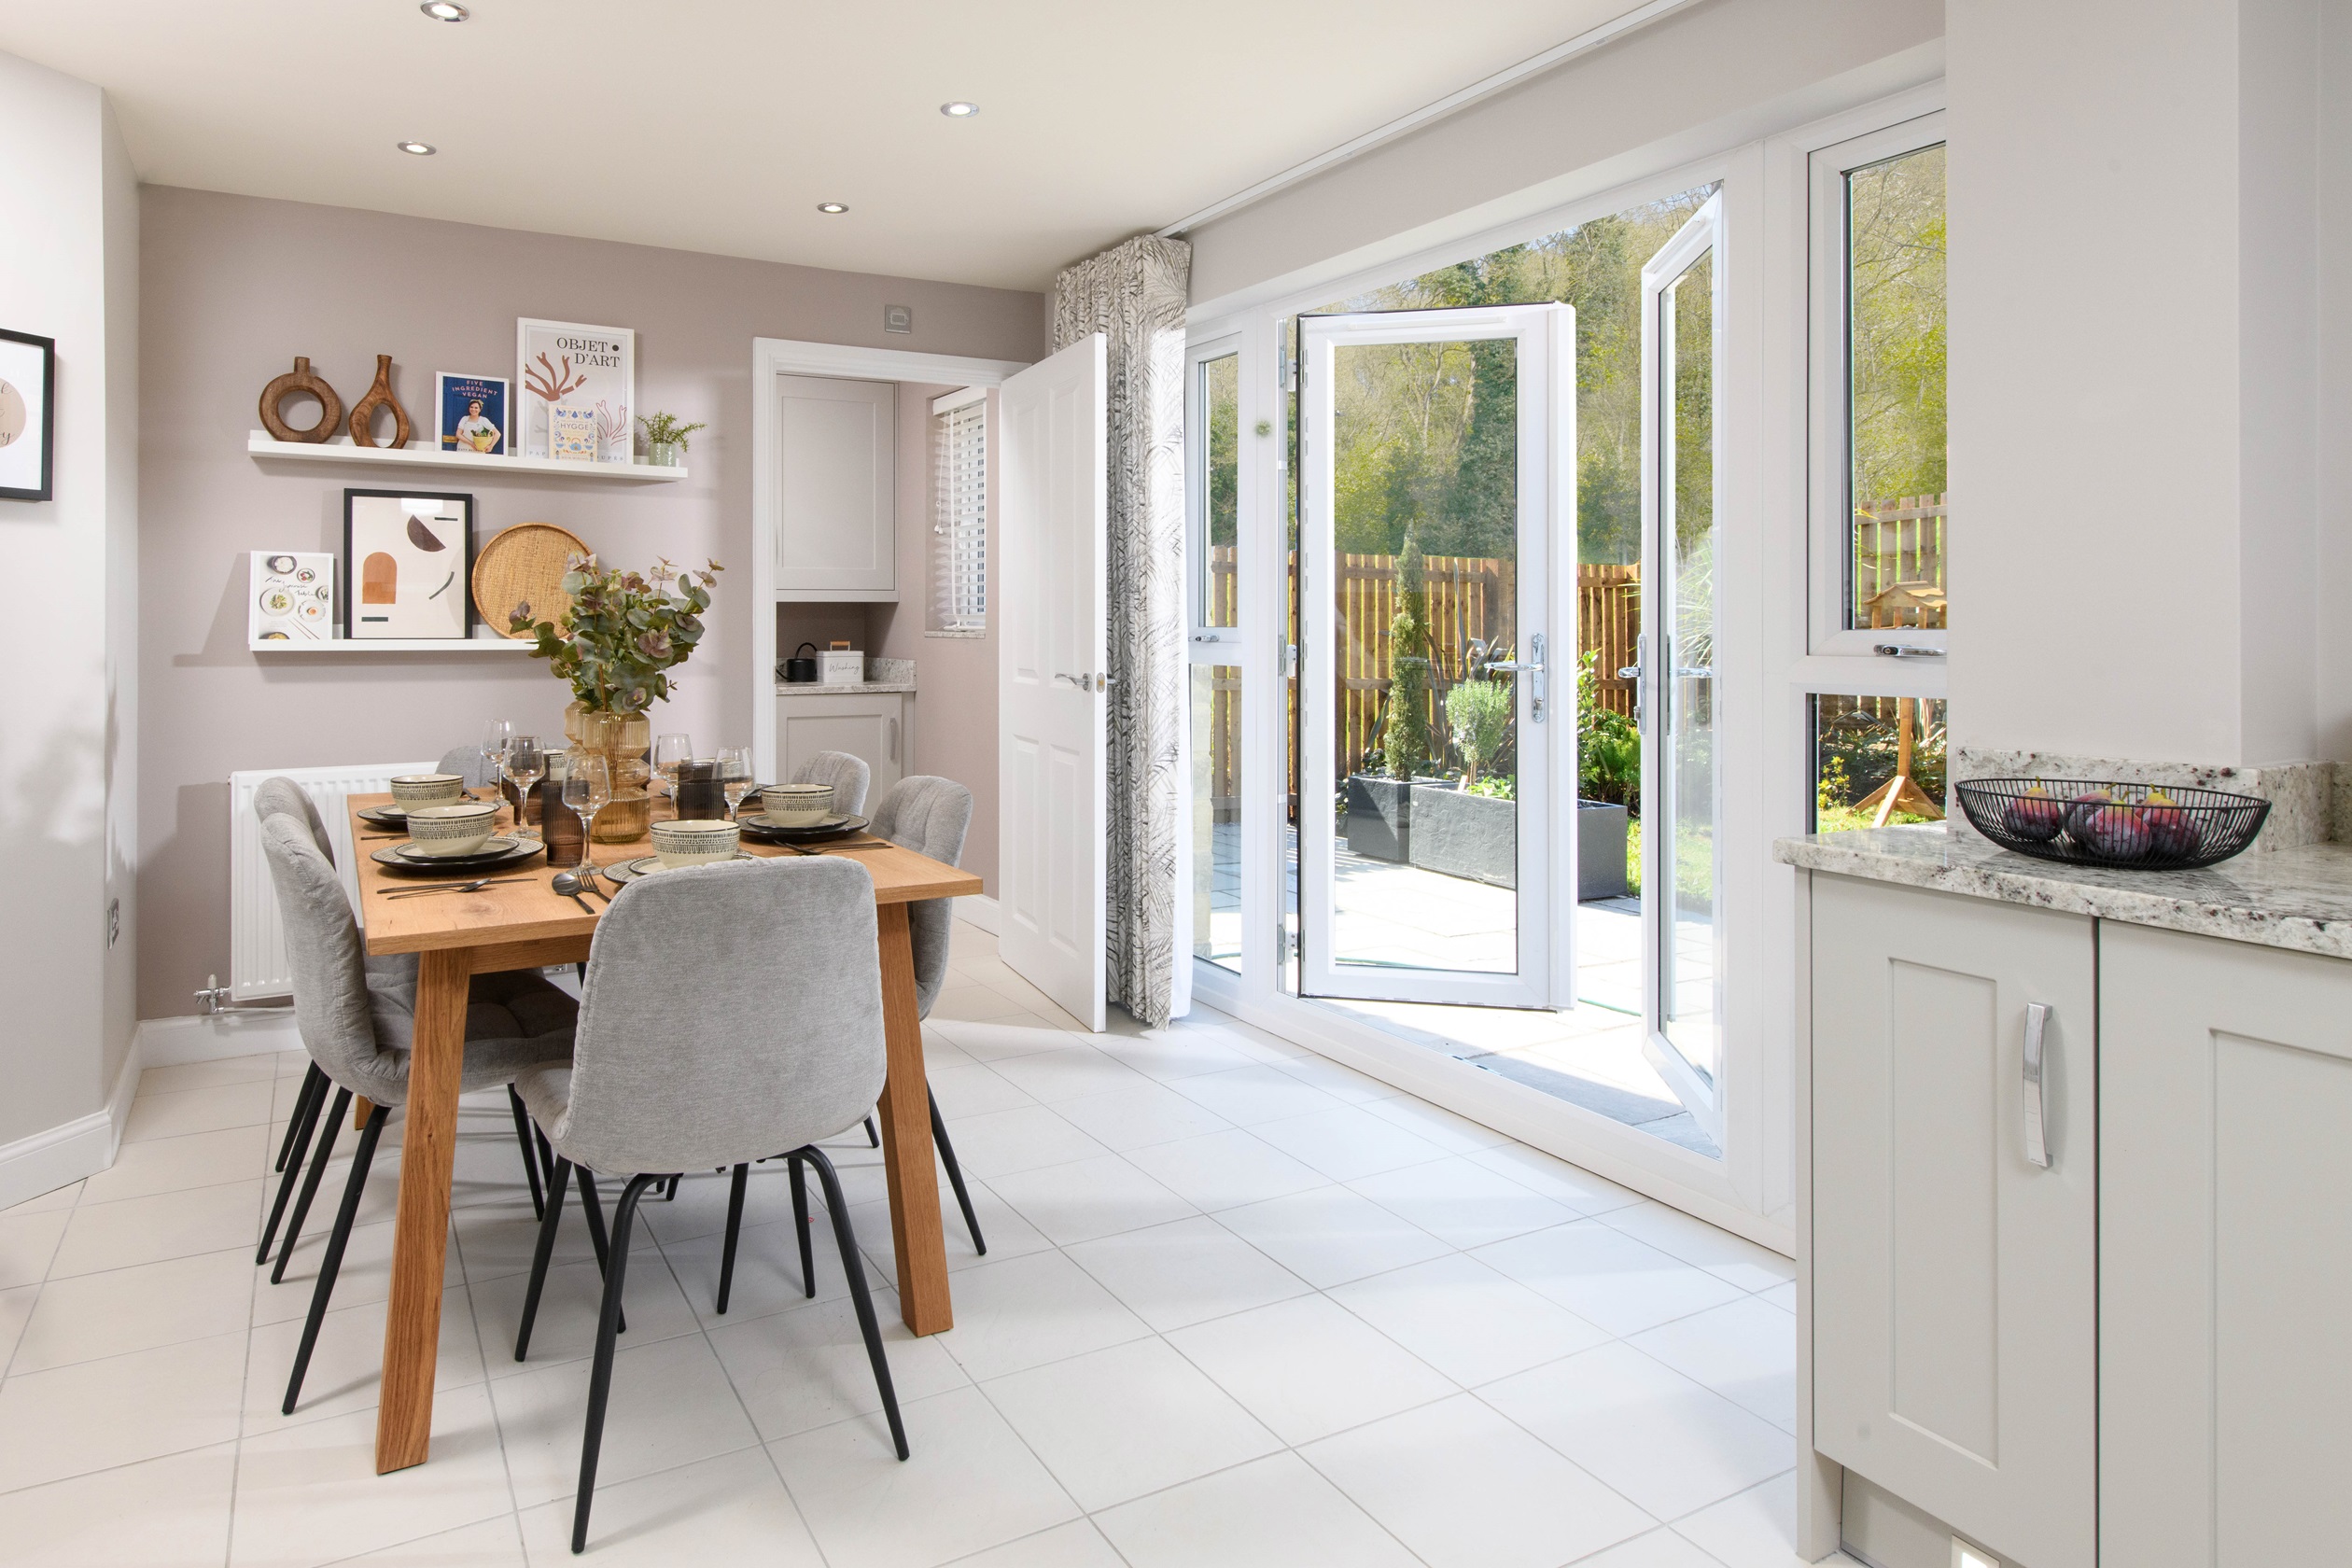 Property 3 of 8. The Mews Windermere Dining Kitchen